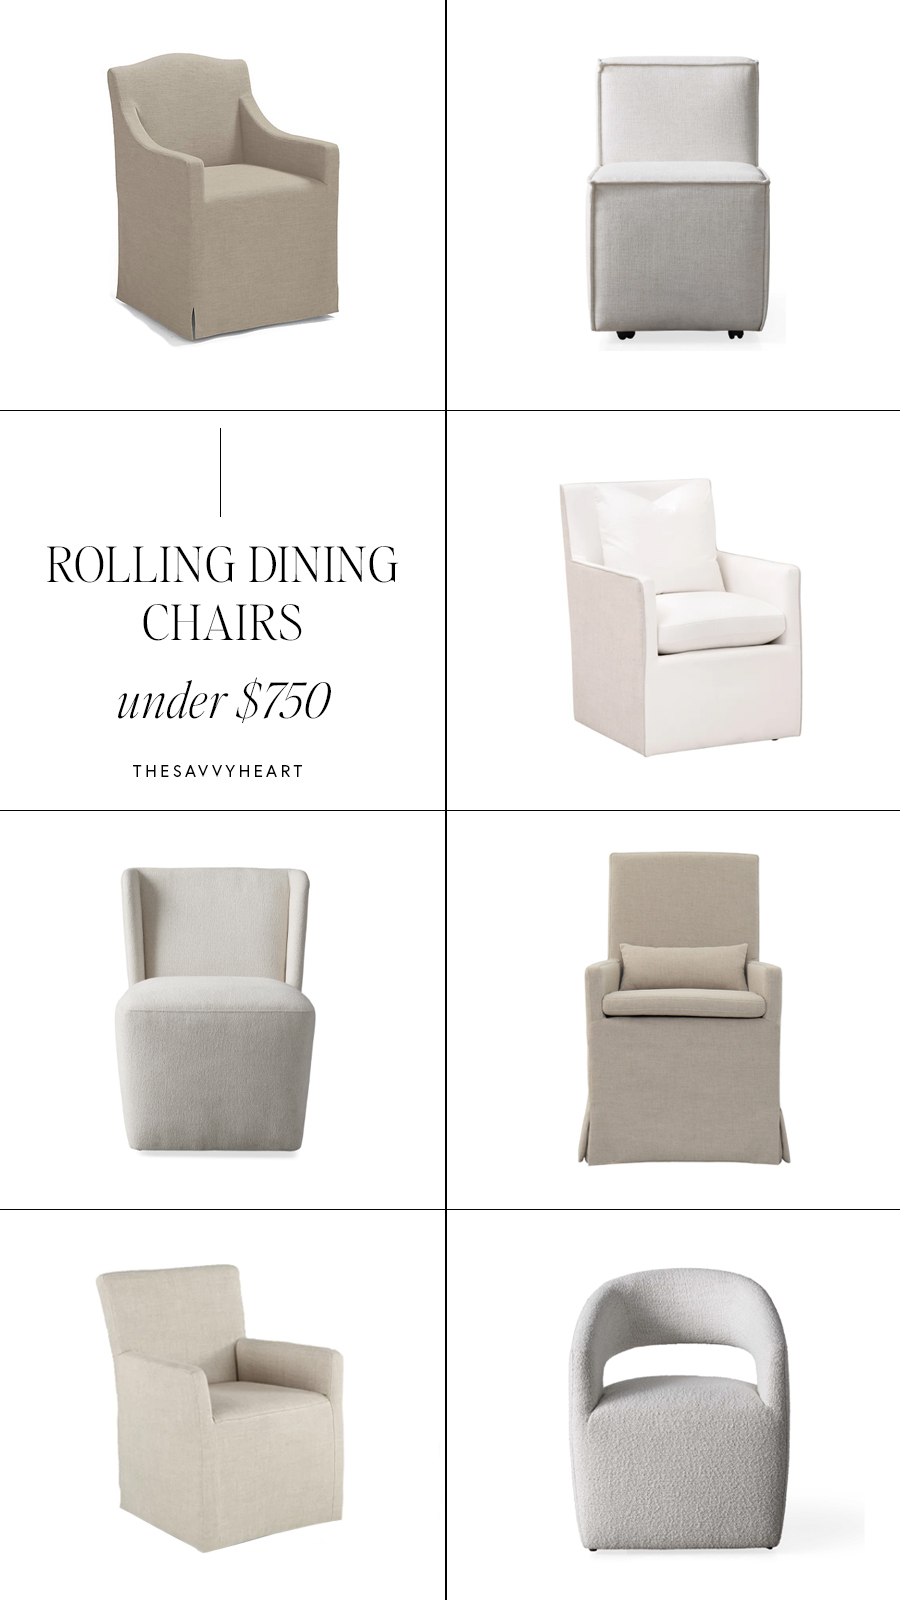 21 Upholstered Dining Room Chairs with Rolling Casters & Wheels